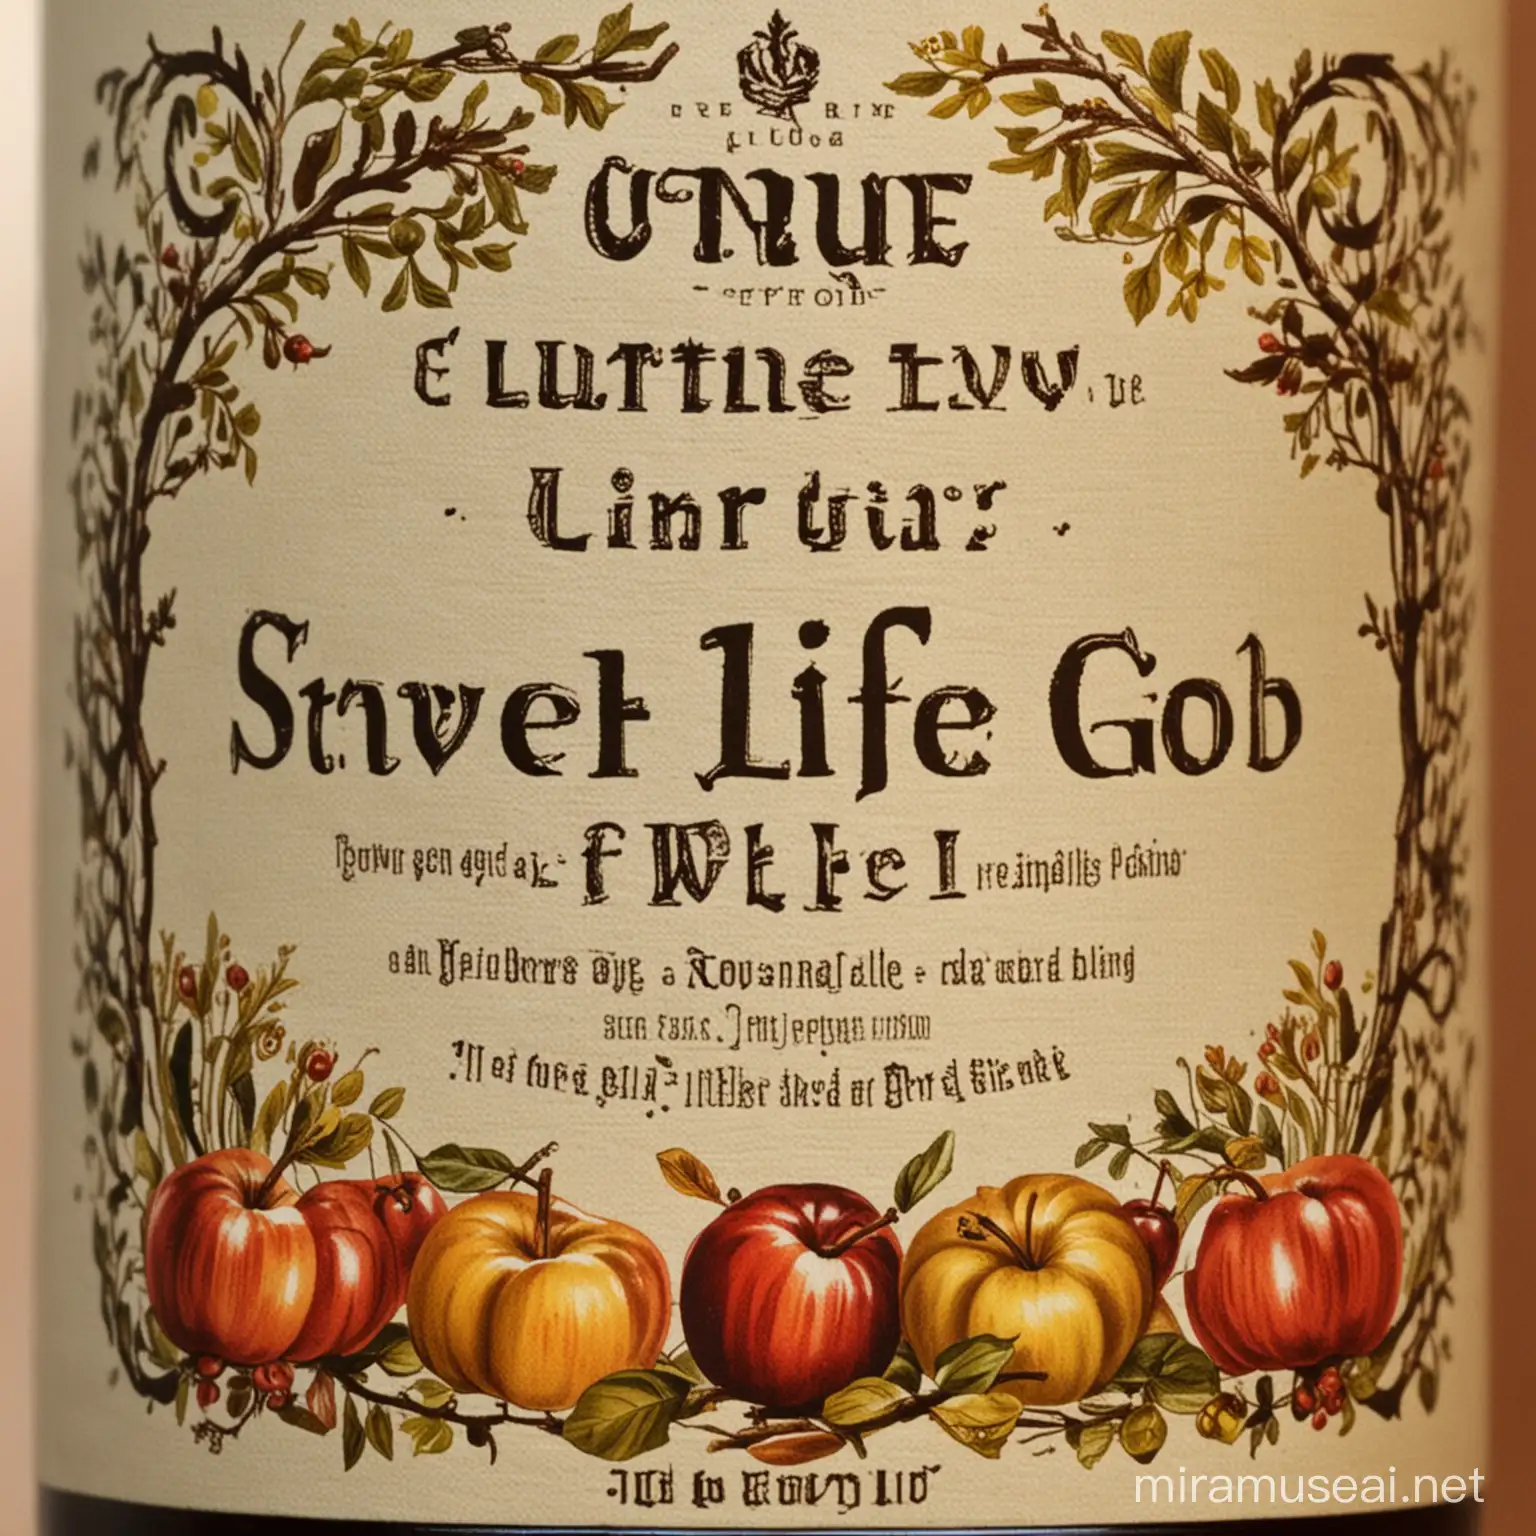 A label for a bottle of cider produced by a christian organisation working for unity called True LIfe in God